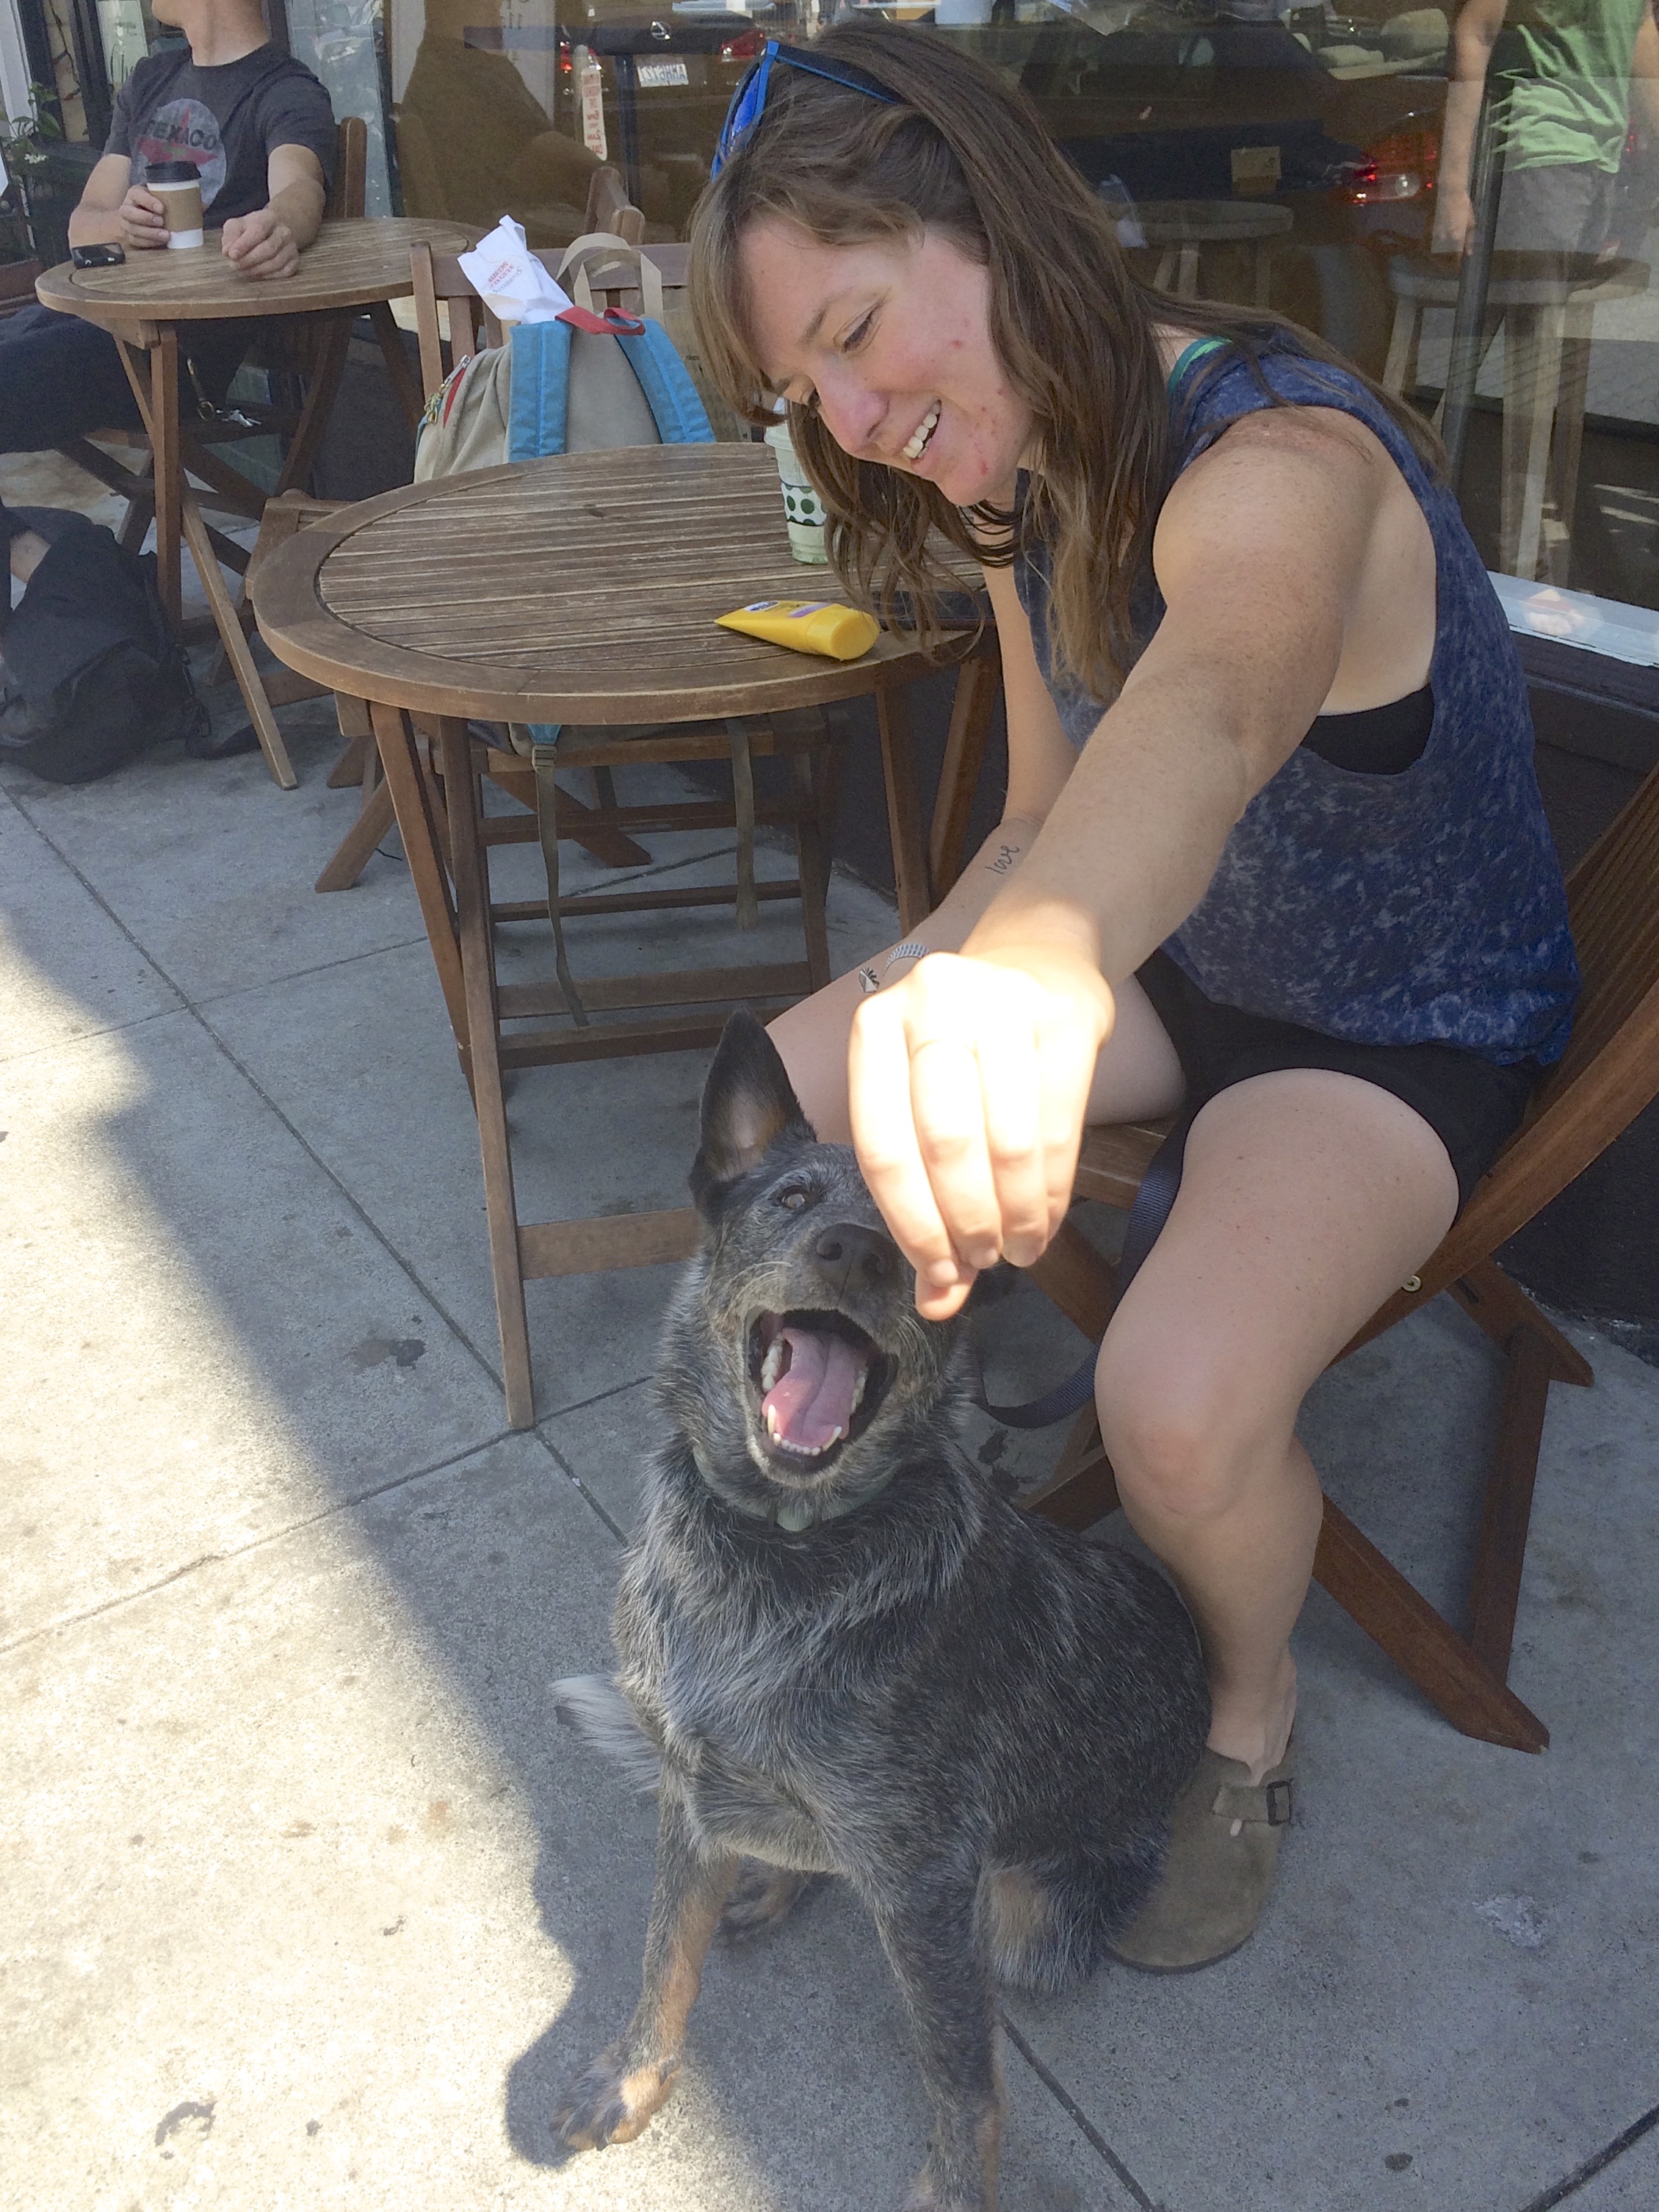 Woman Offering Treat To Smiling Blue Heeler